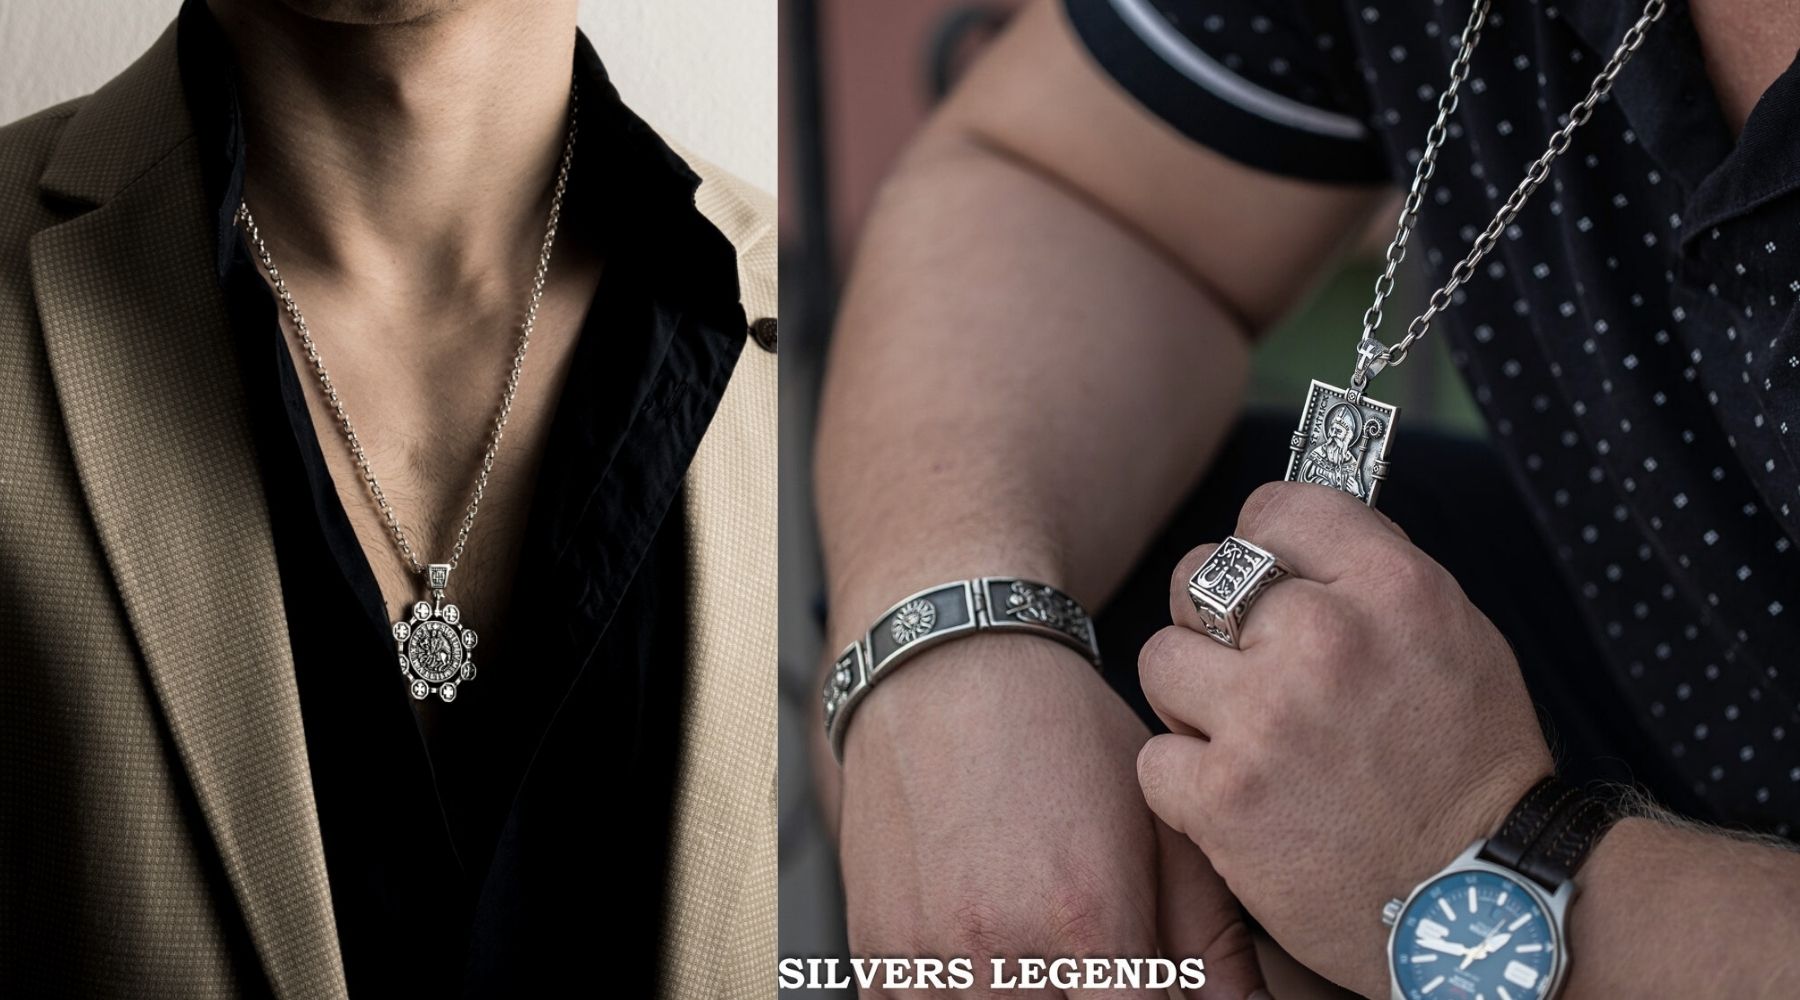 Jyotish Shastra: There Are Many Benefits Of Wearing Silver Jewelry, You  Will Be Surprised To Know - Jyotish Shastra: चांदी के आभूषण धारण करने से  होते है अनेक लाभ, जानकर हो जाएंगे